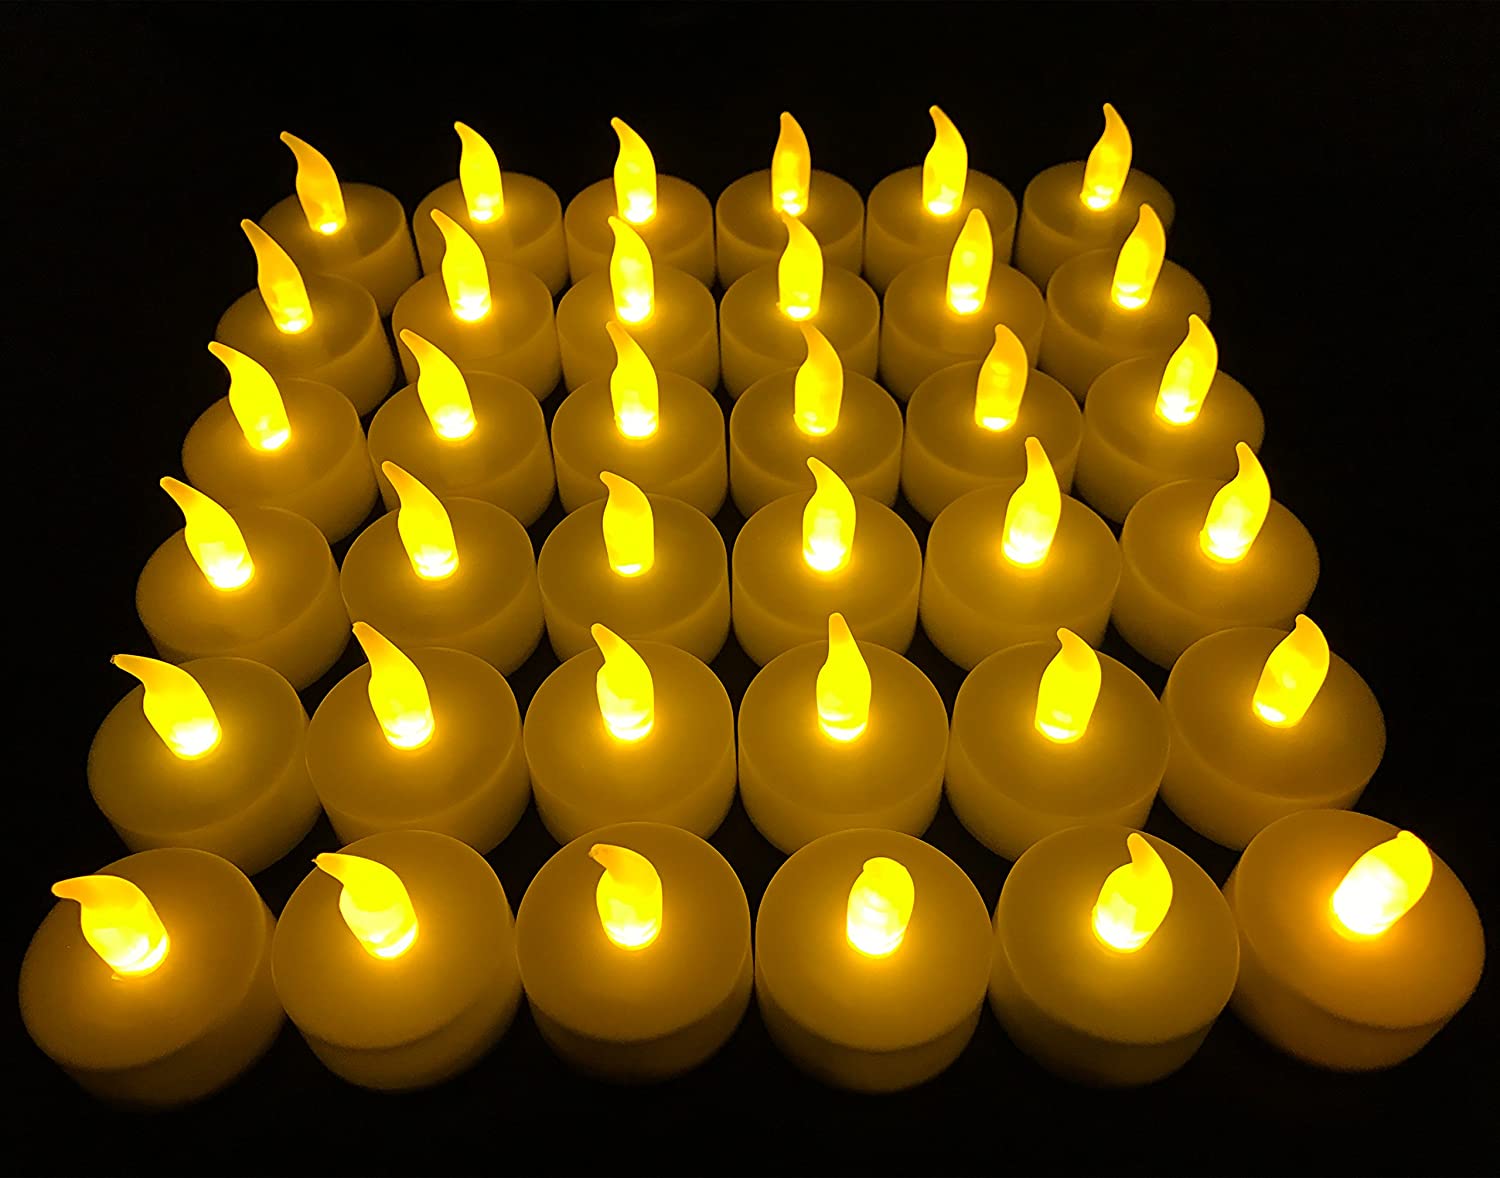 36-Pack Vivii Flameless LED Tea Light Candles (Battery Operated) $9.49 + Free Shipping w/ Prime or on $25+